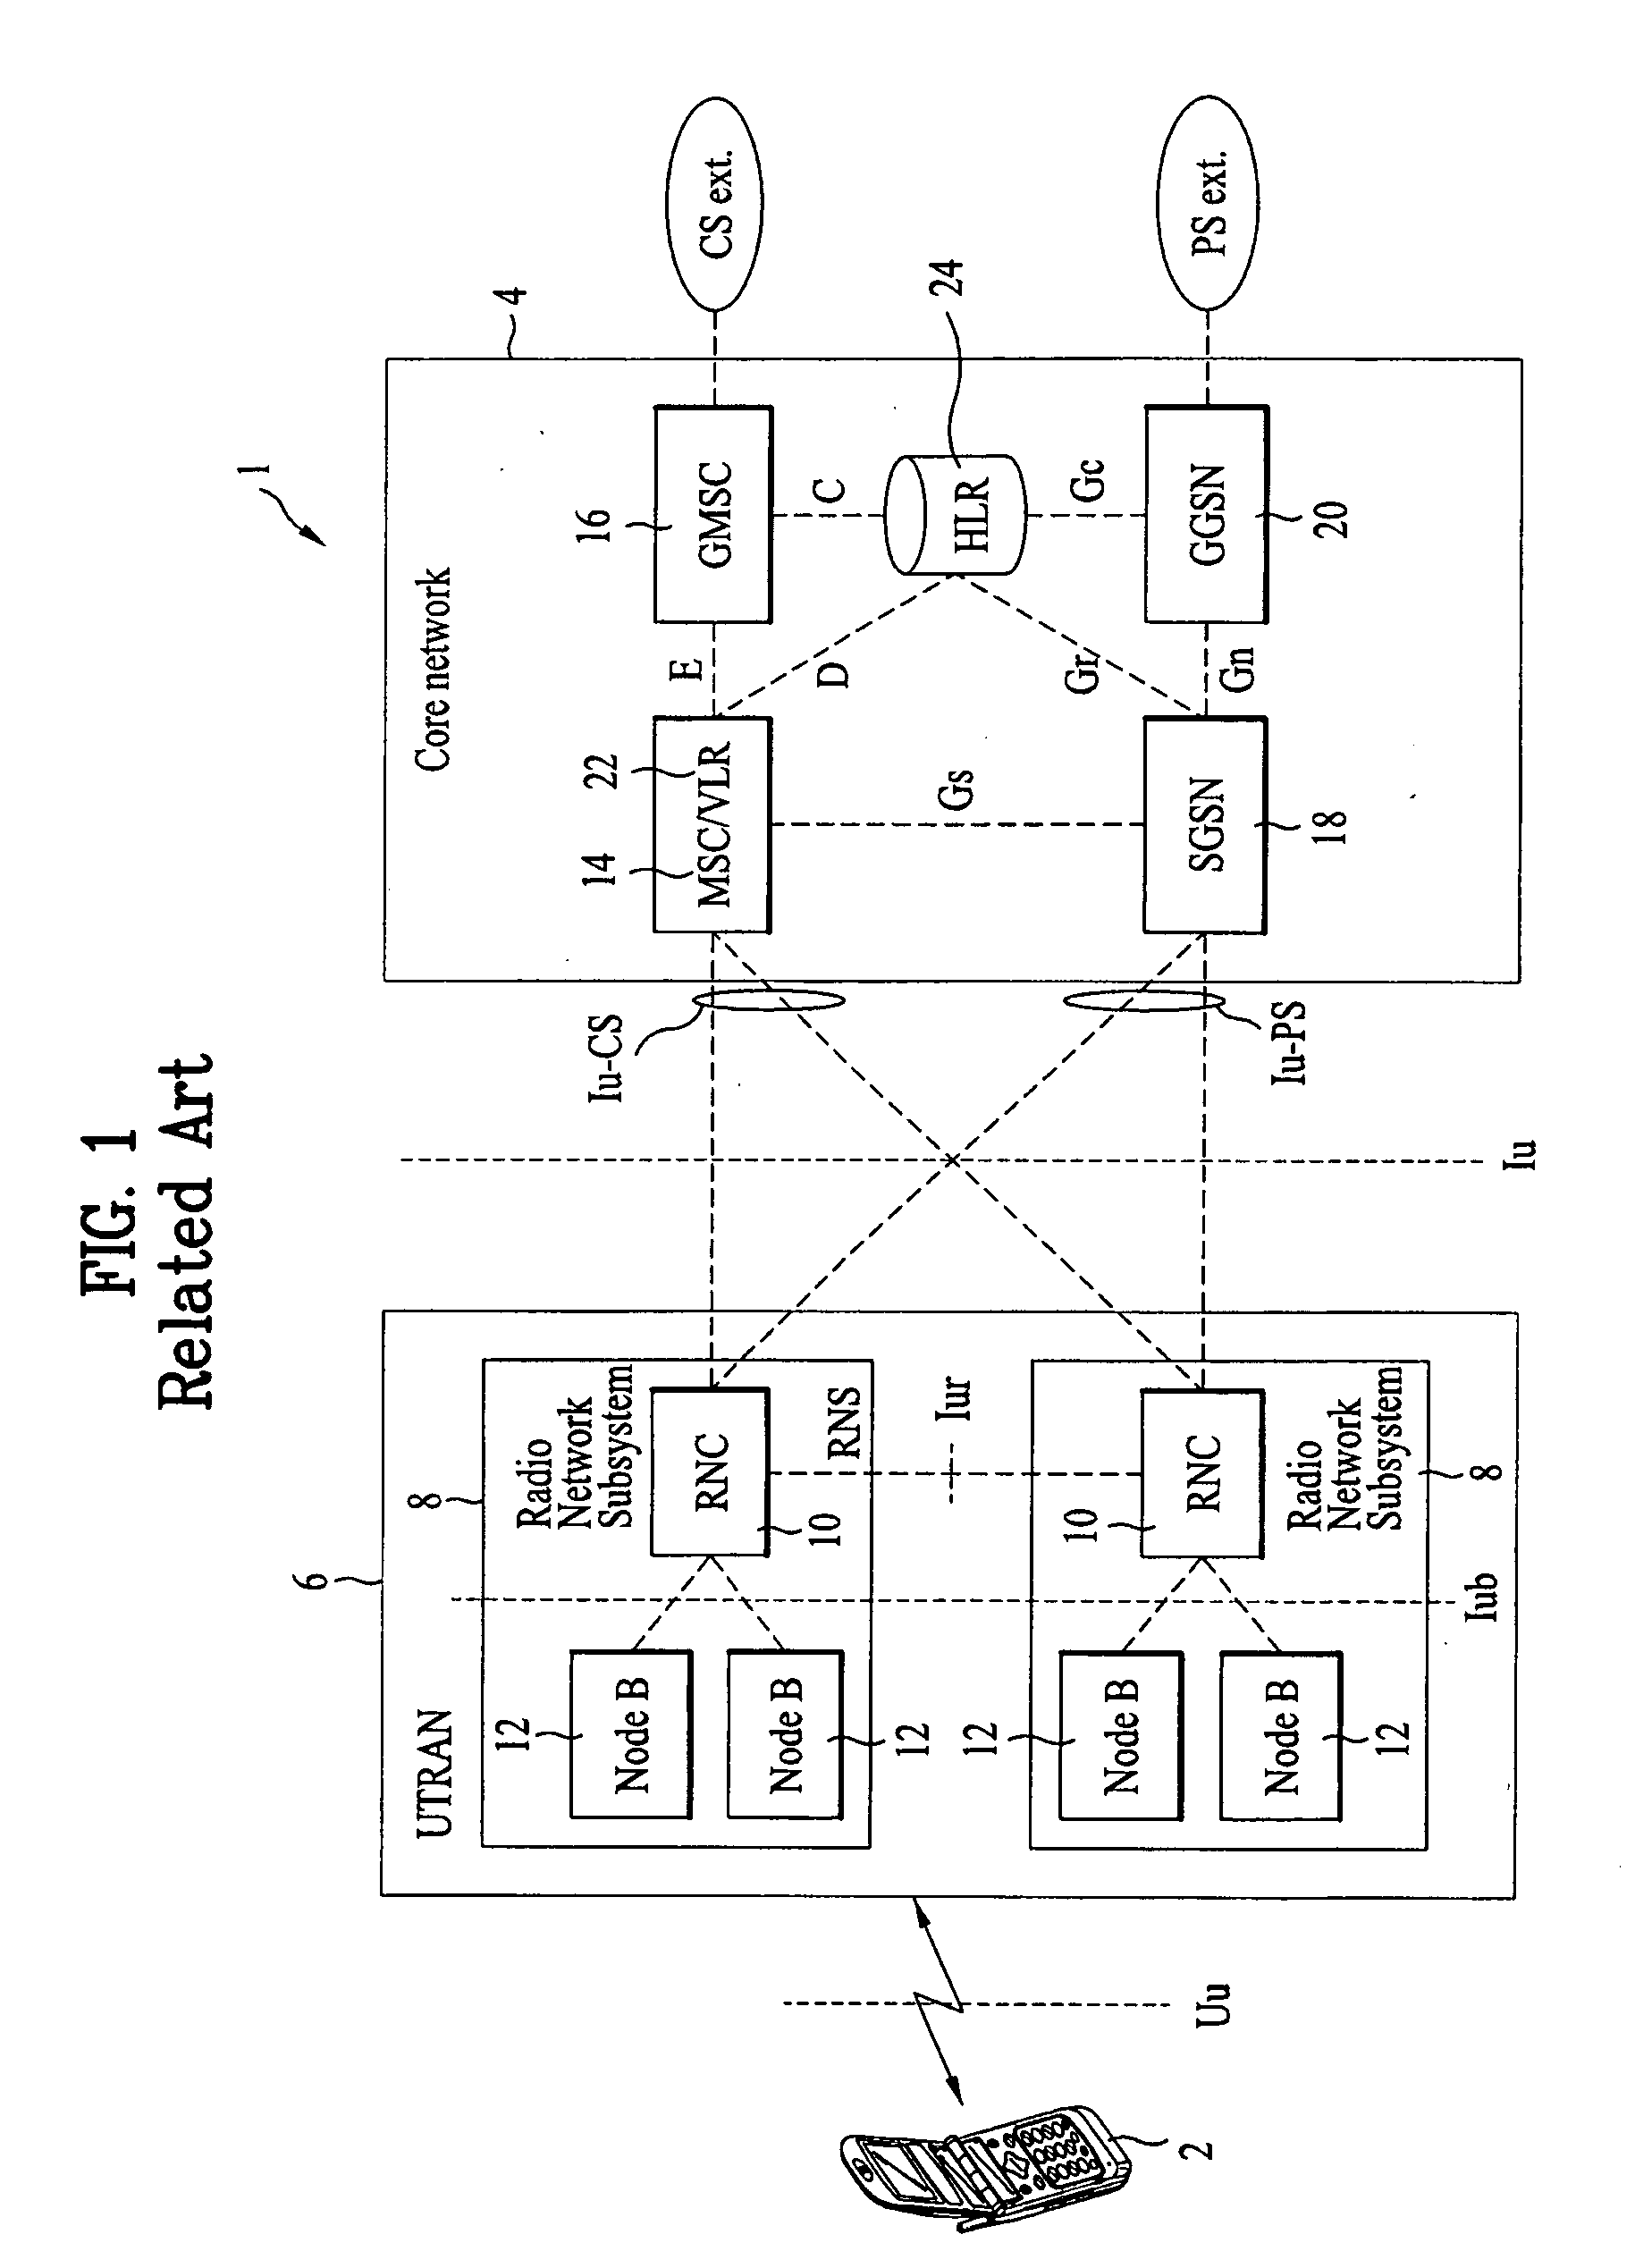 Method and apparatus for selecting MBMS radio bearer type